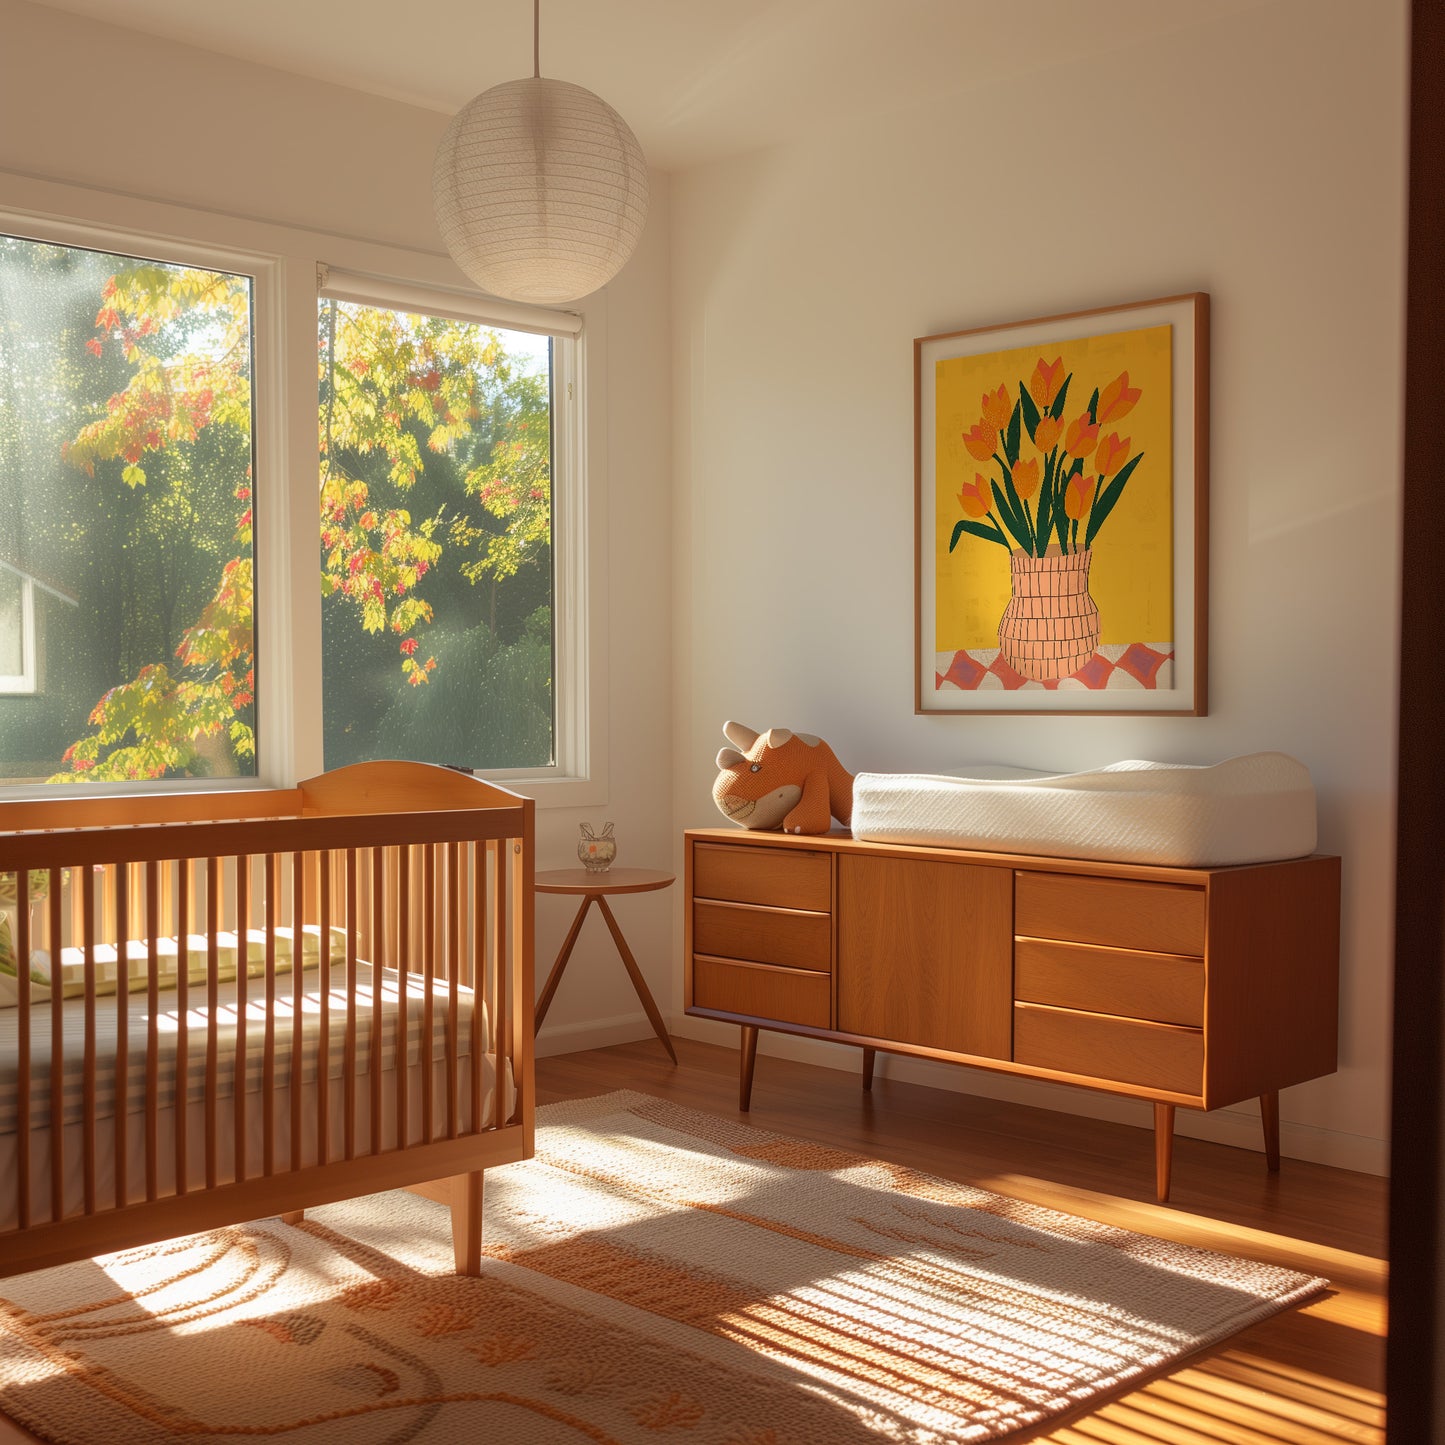 A cozy bedroom with a wooden crib and dresser, colorful artwork, and autumn leaves visible outside the window.